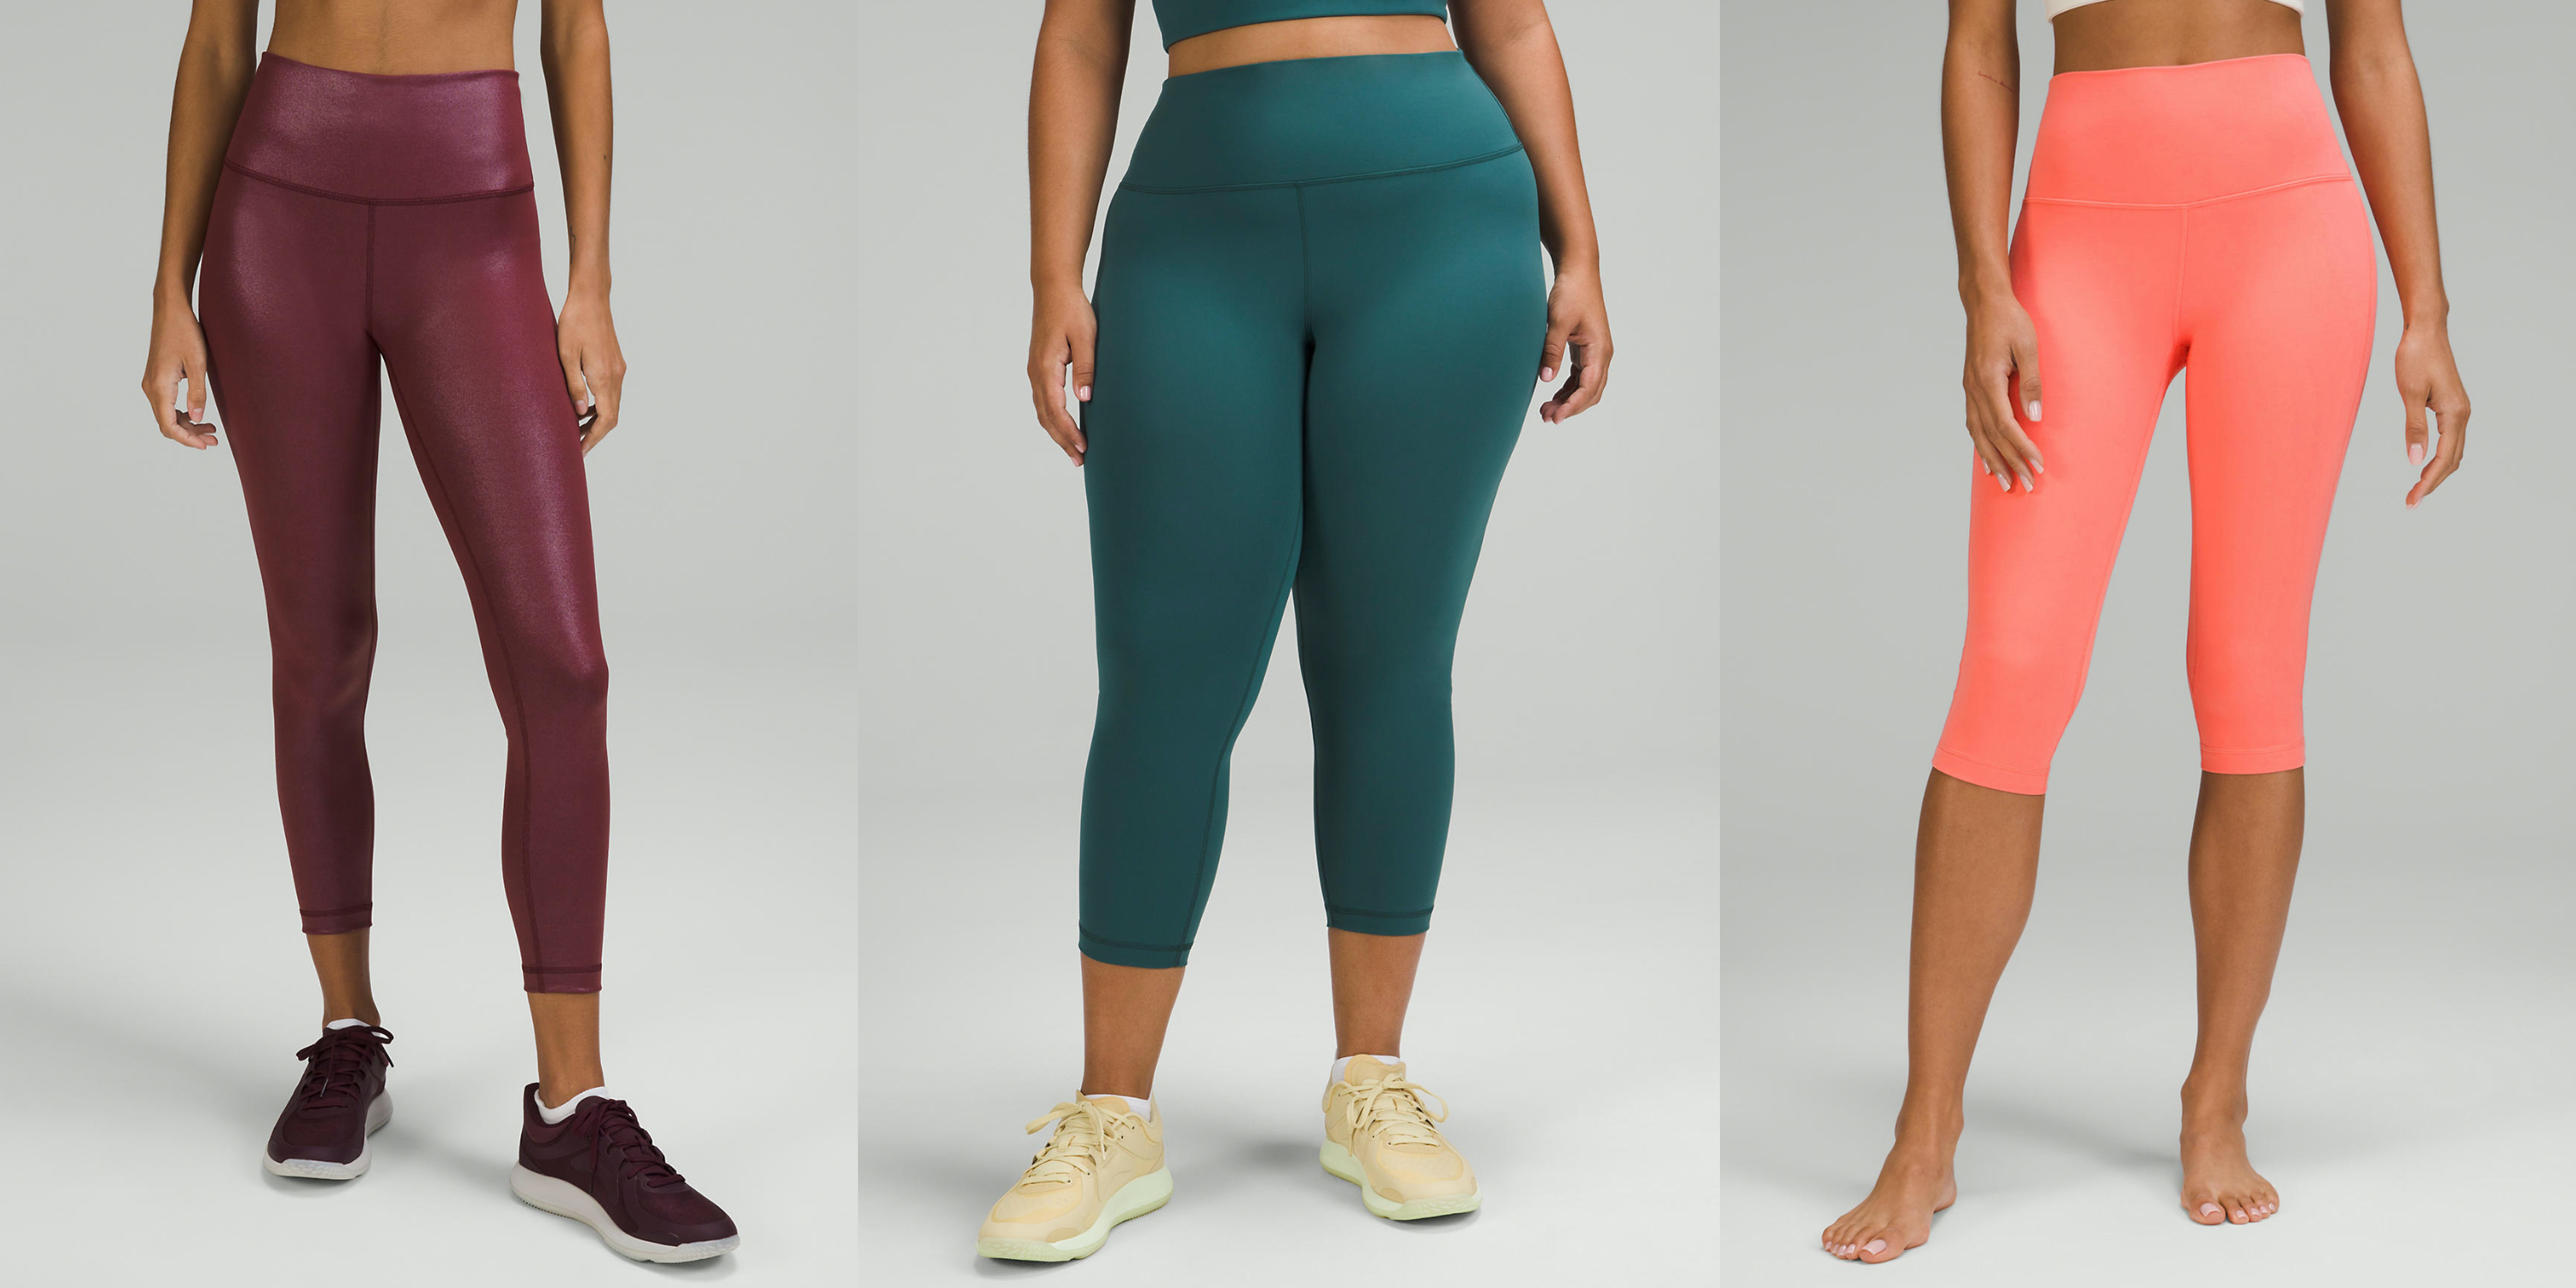 12 Of The Best Finds From Lululemon's “We Made Too Much” Sale